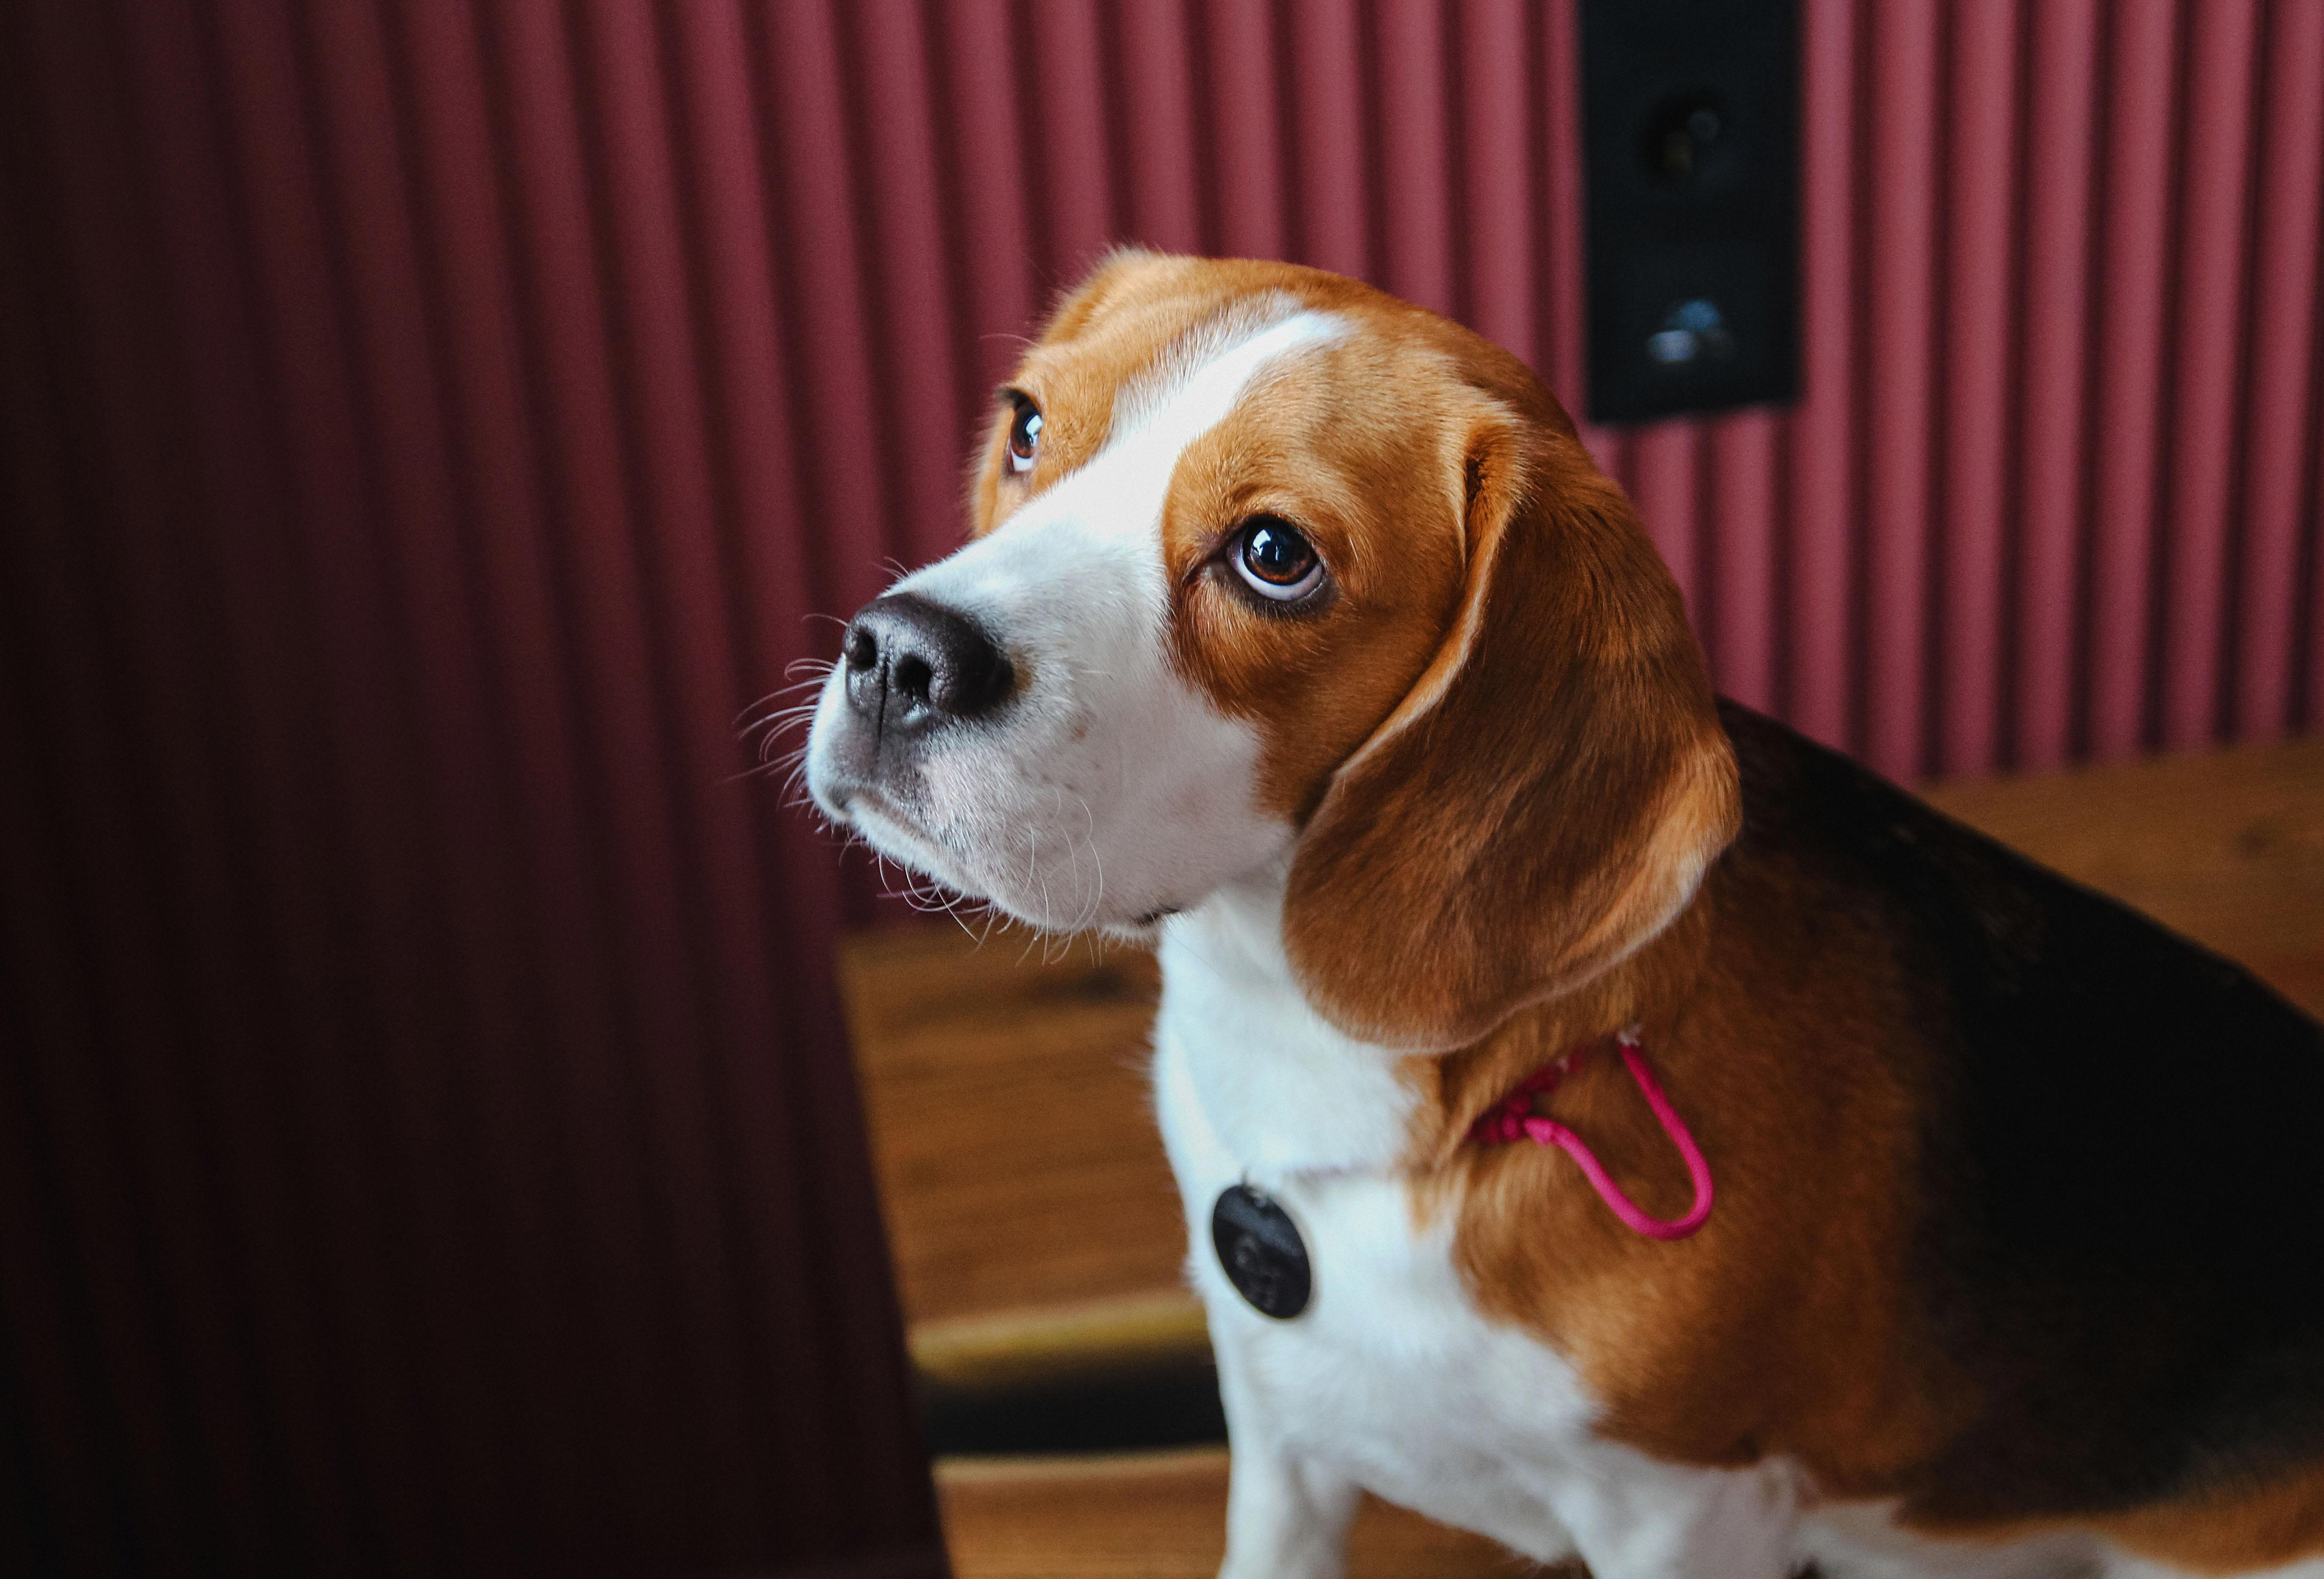 How to Safely Clean Your Beagle's Ears: A Step-By-Step Guide